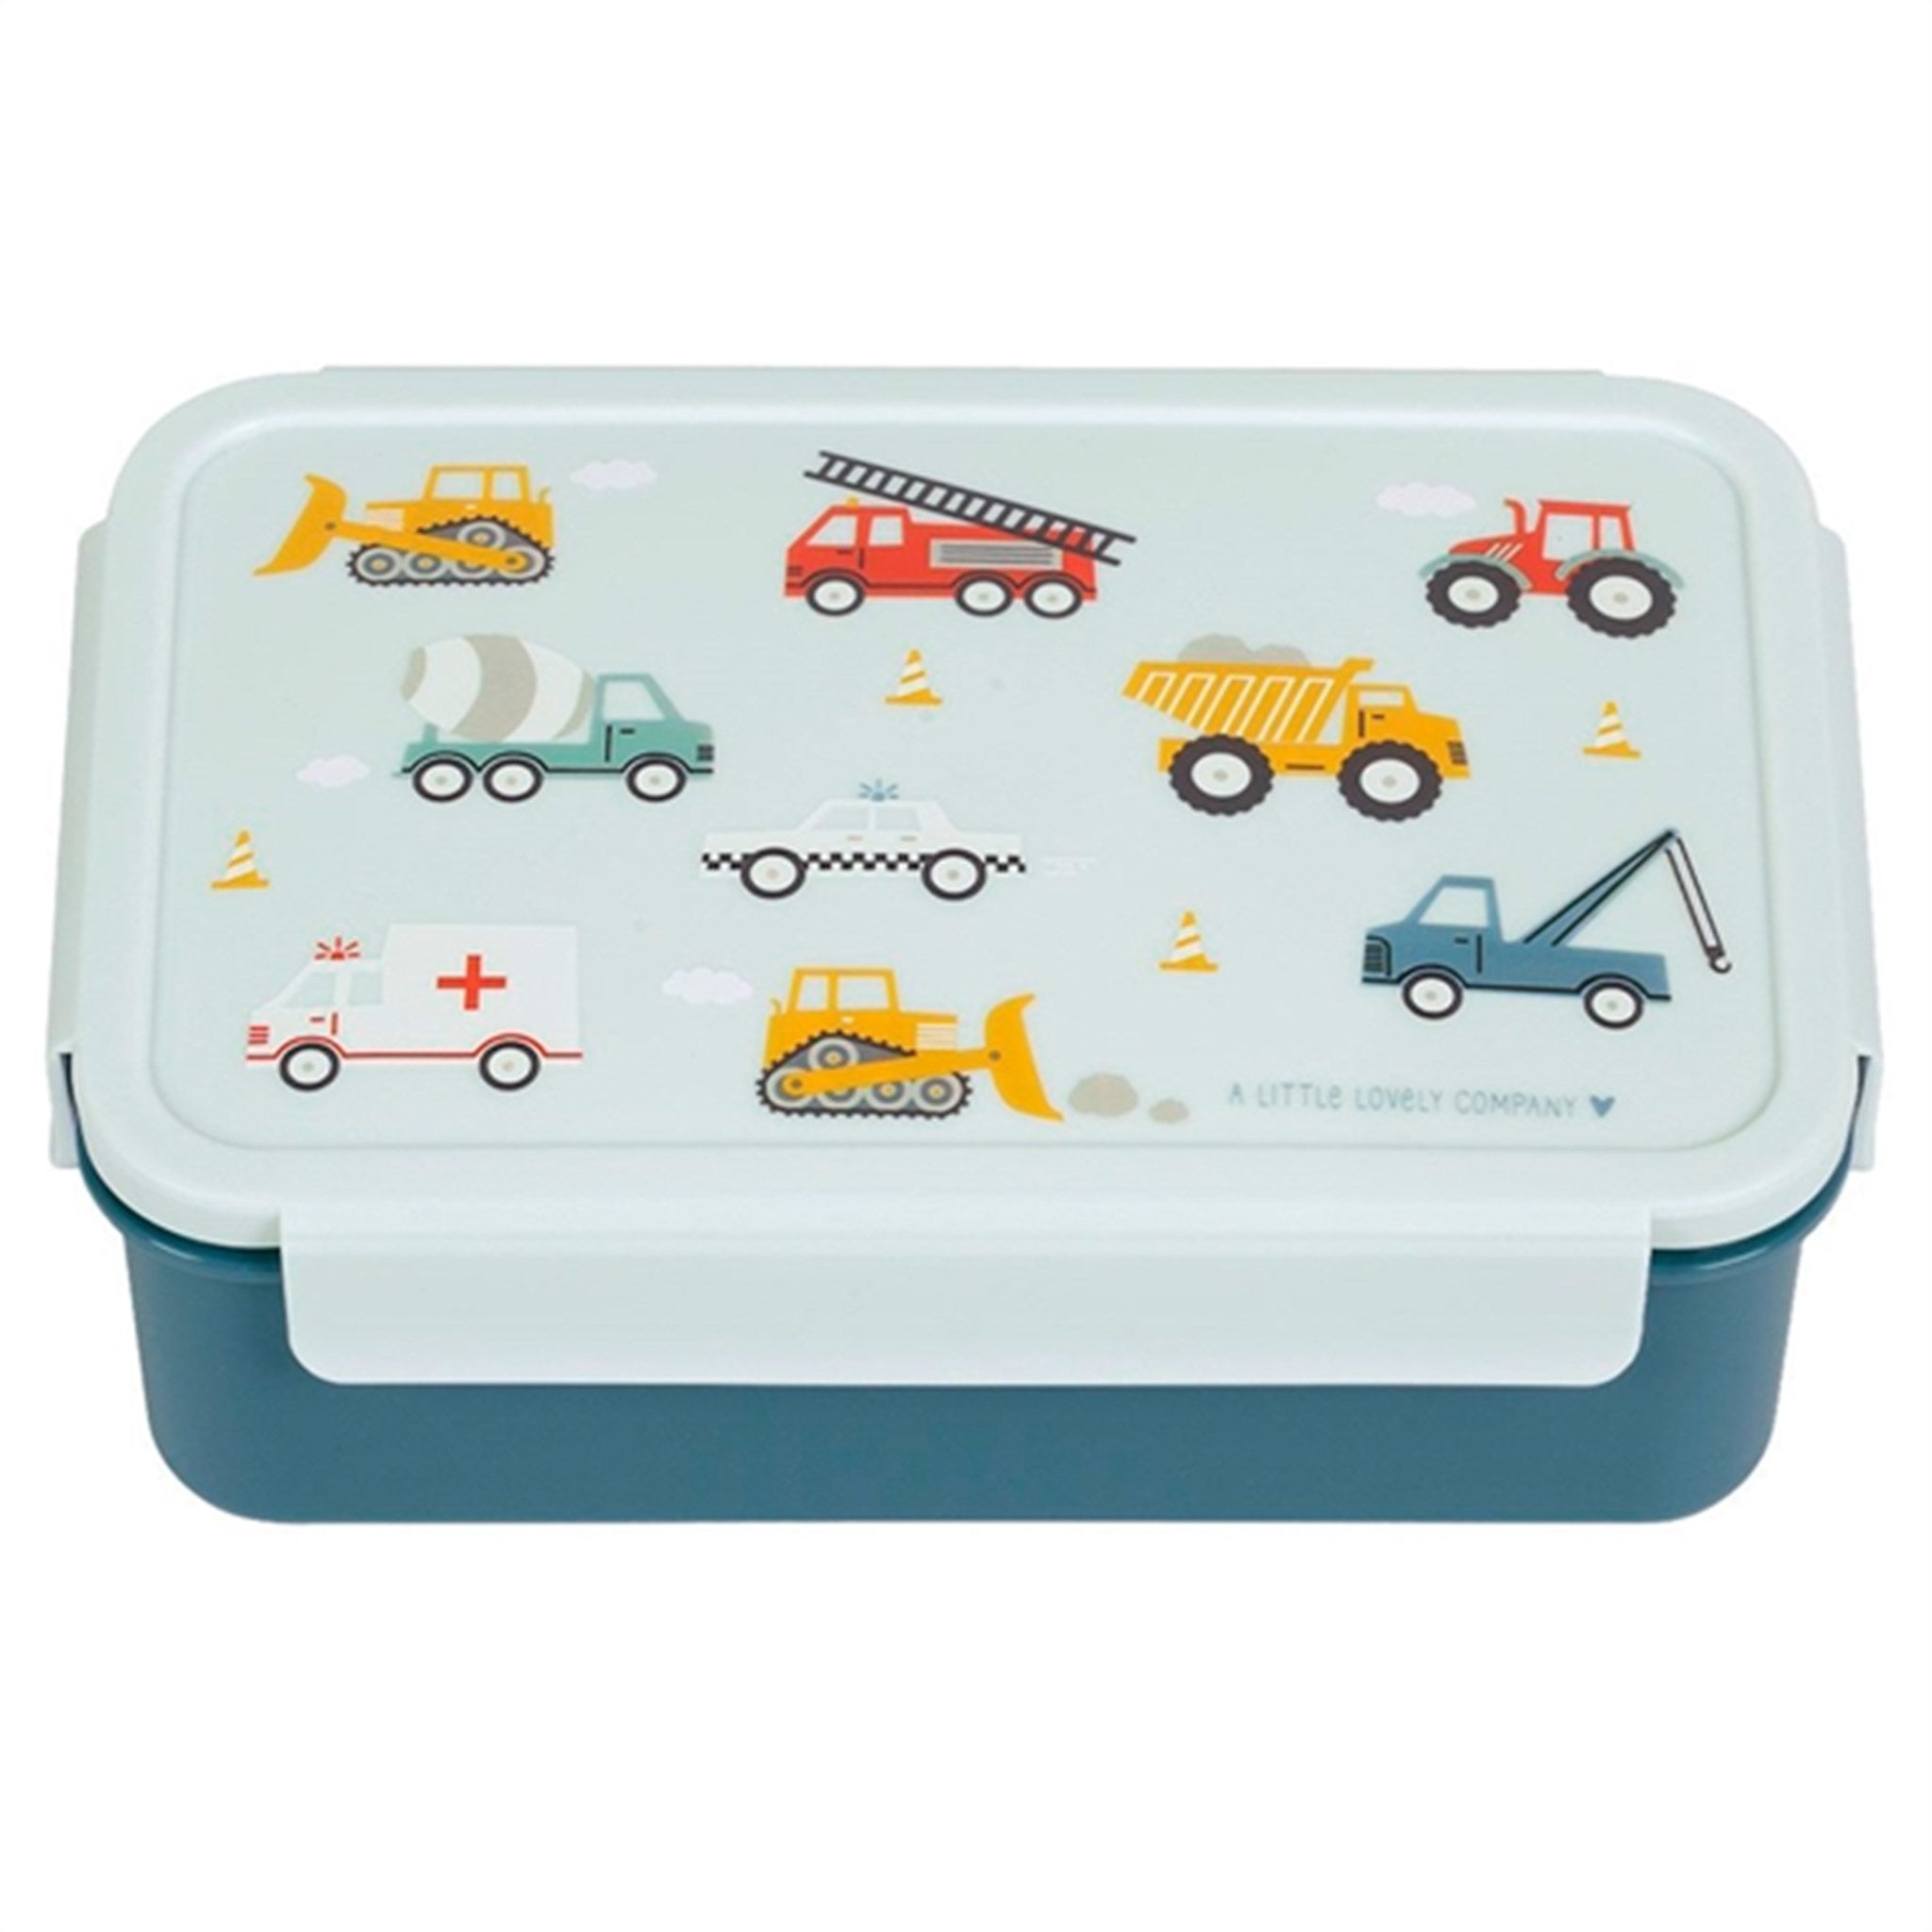 A Little Lovely Company Bento Lunch Box Vehicles